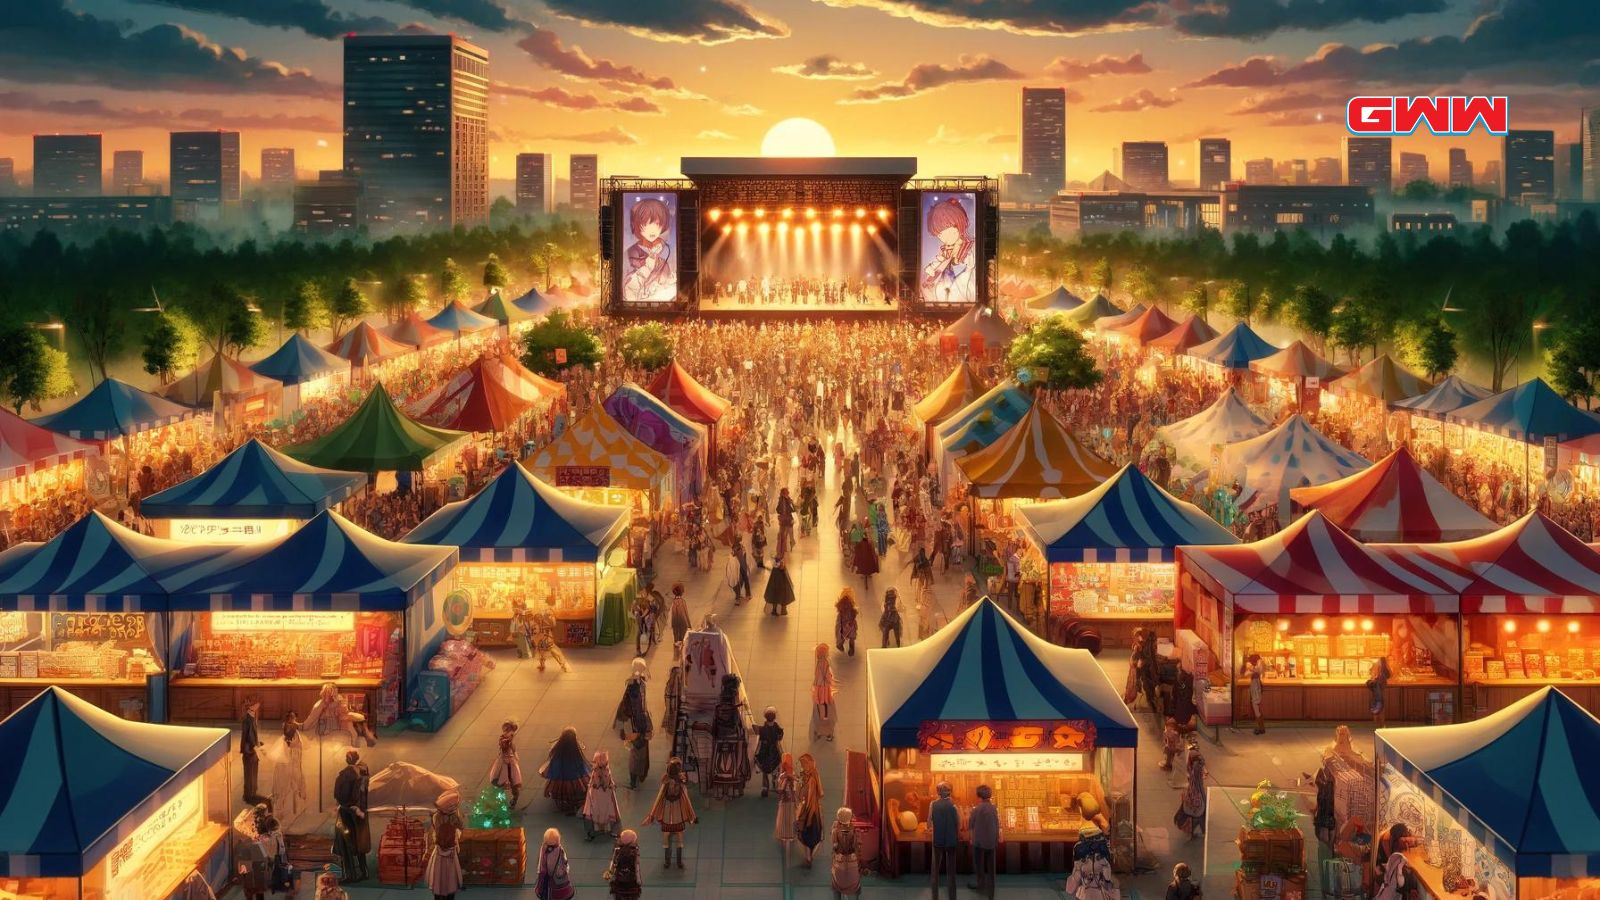 Sunset anime festival with stage and festive stalls